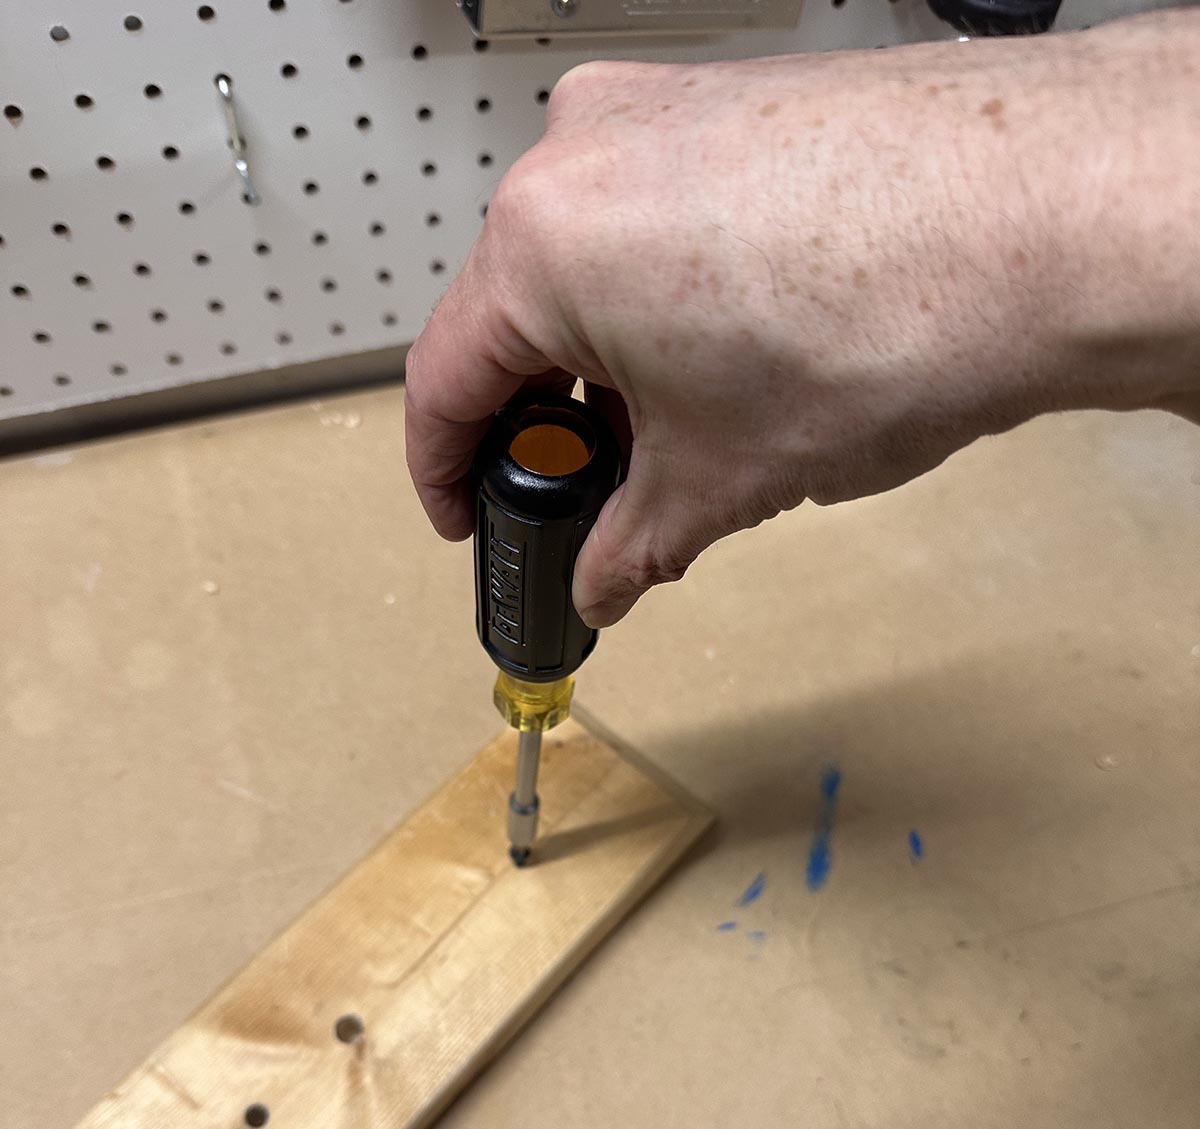 A person using a tool from the DeWalt mechanics tool set